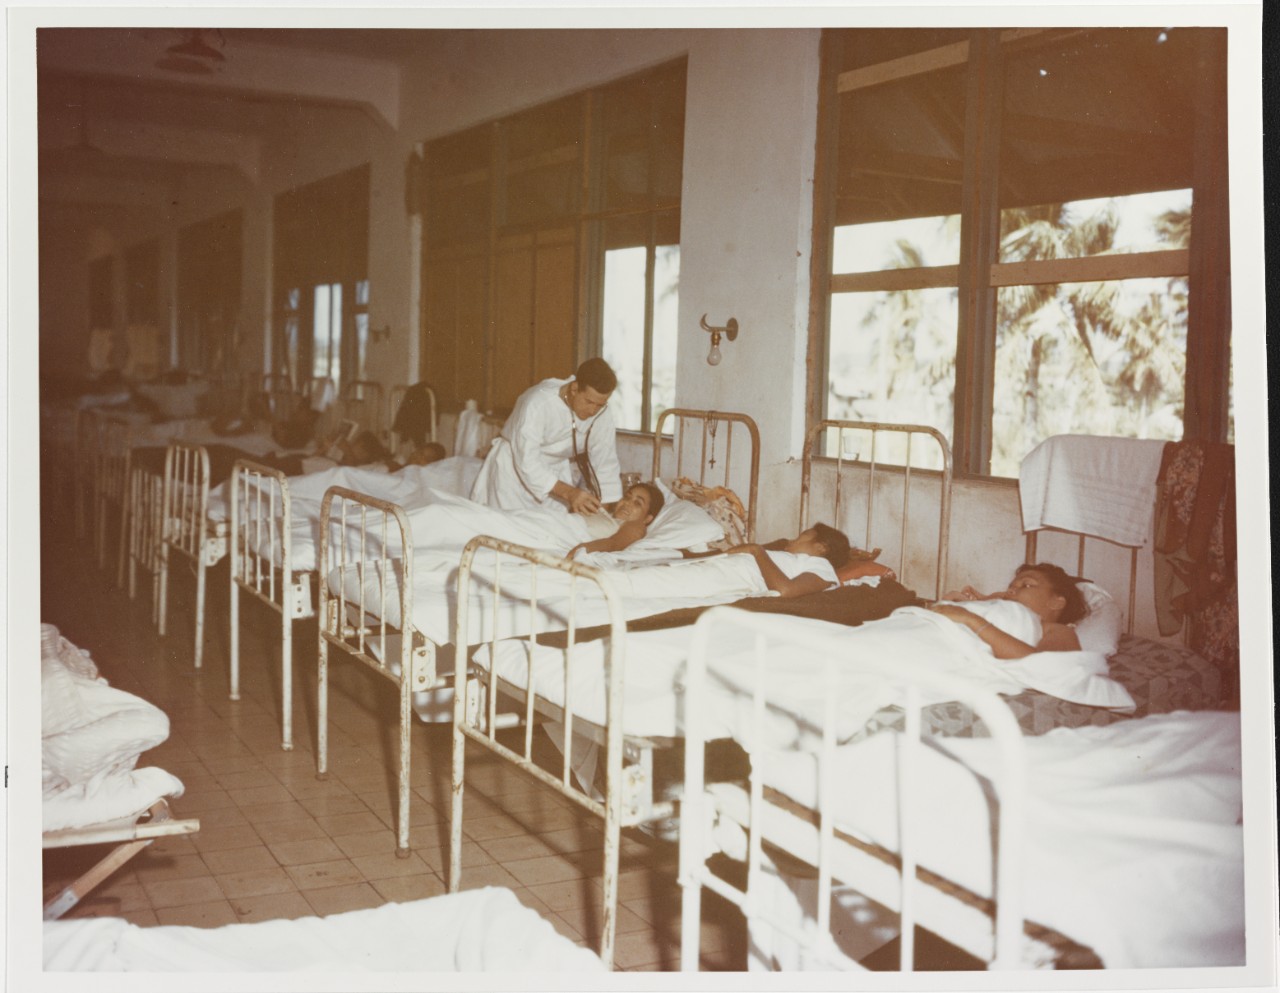 Lieutenant Edgar L. Aaberg, USNR (MC) making the rounds in hospital at Agana, Guam, in 1944-1945